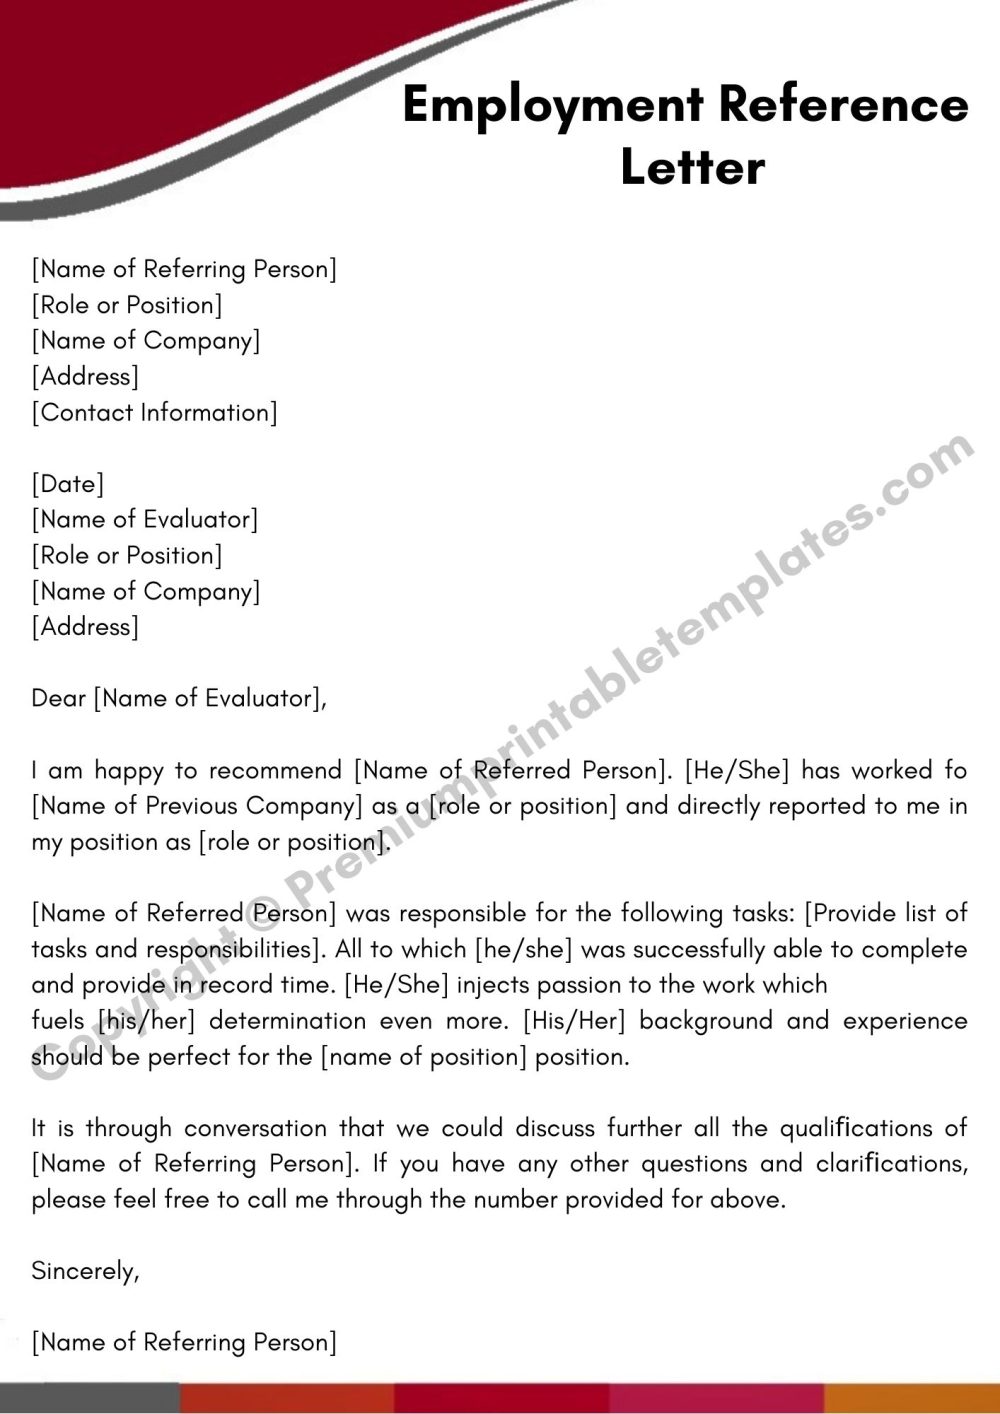 Employment Reference Letter PDF